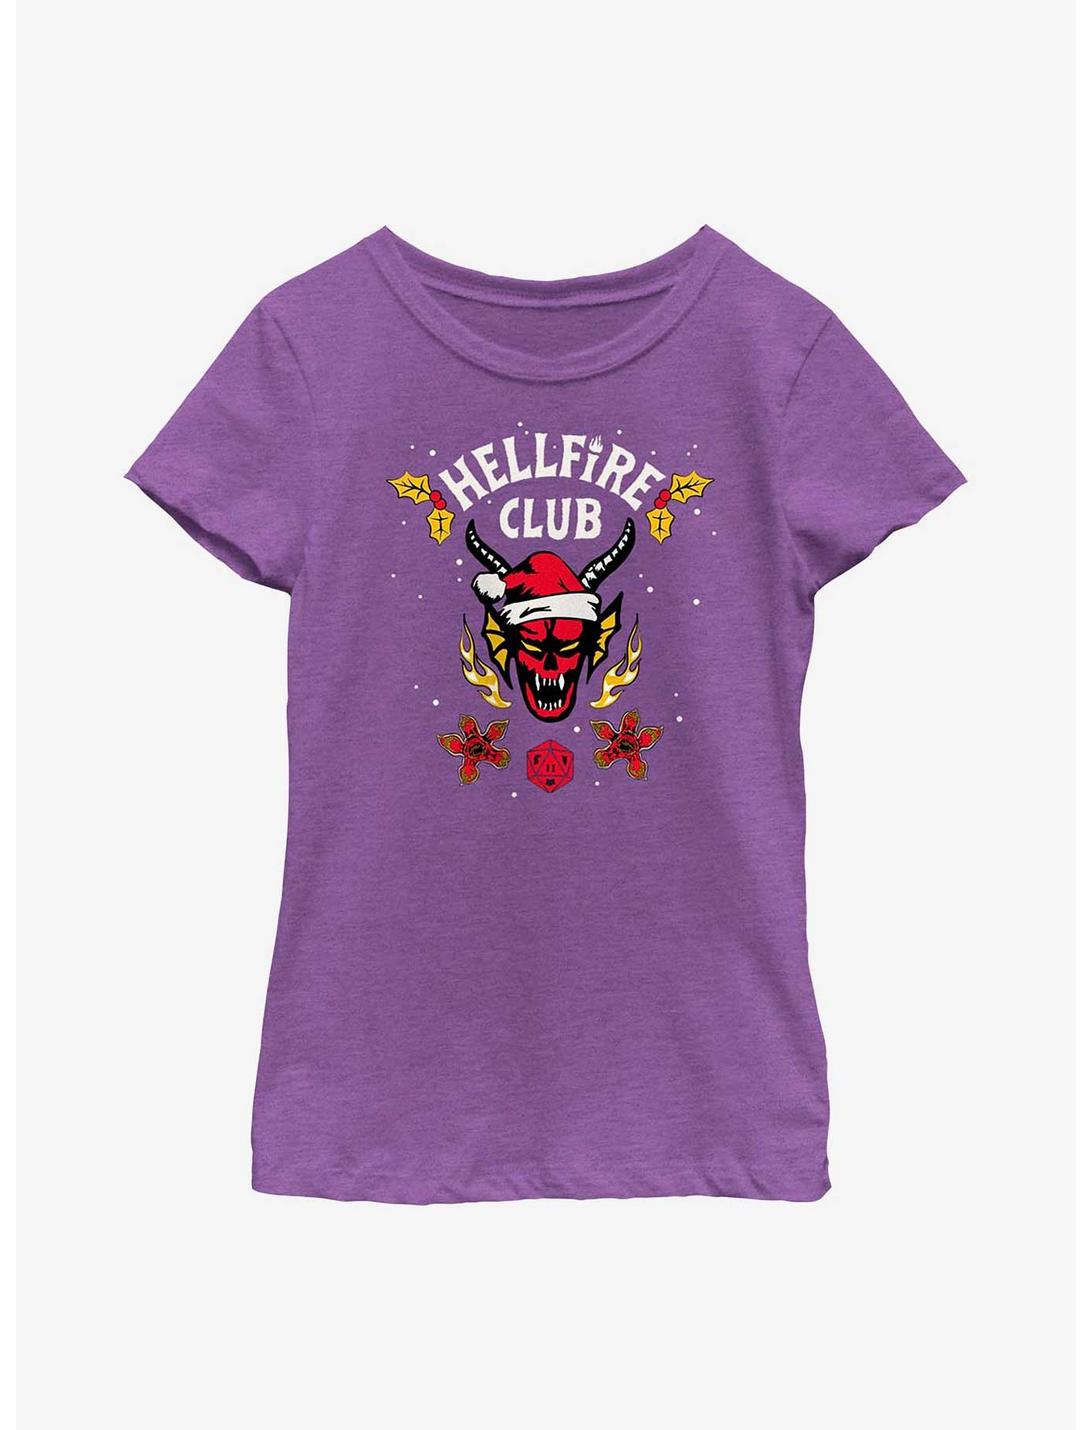 Stranger Things Holiday Style Hellfire Club Youth Girls T-Shirt, PURPLE BERRY, hi-res